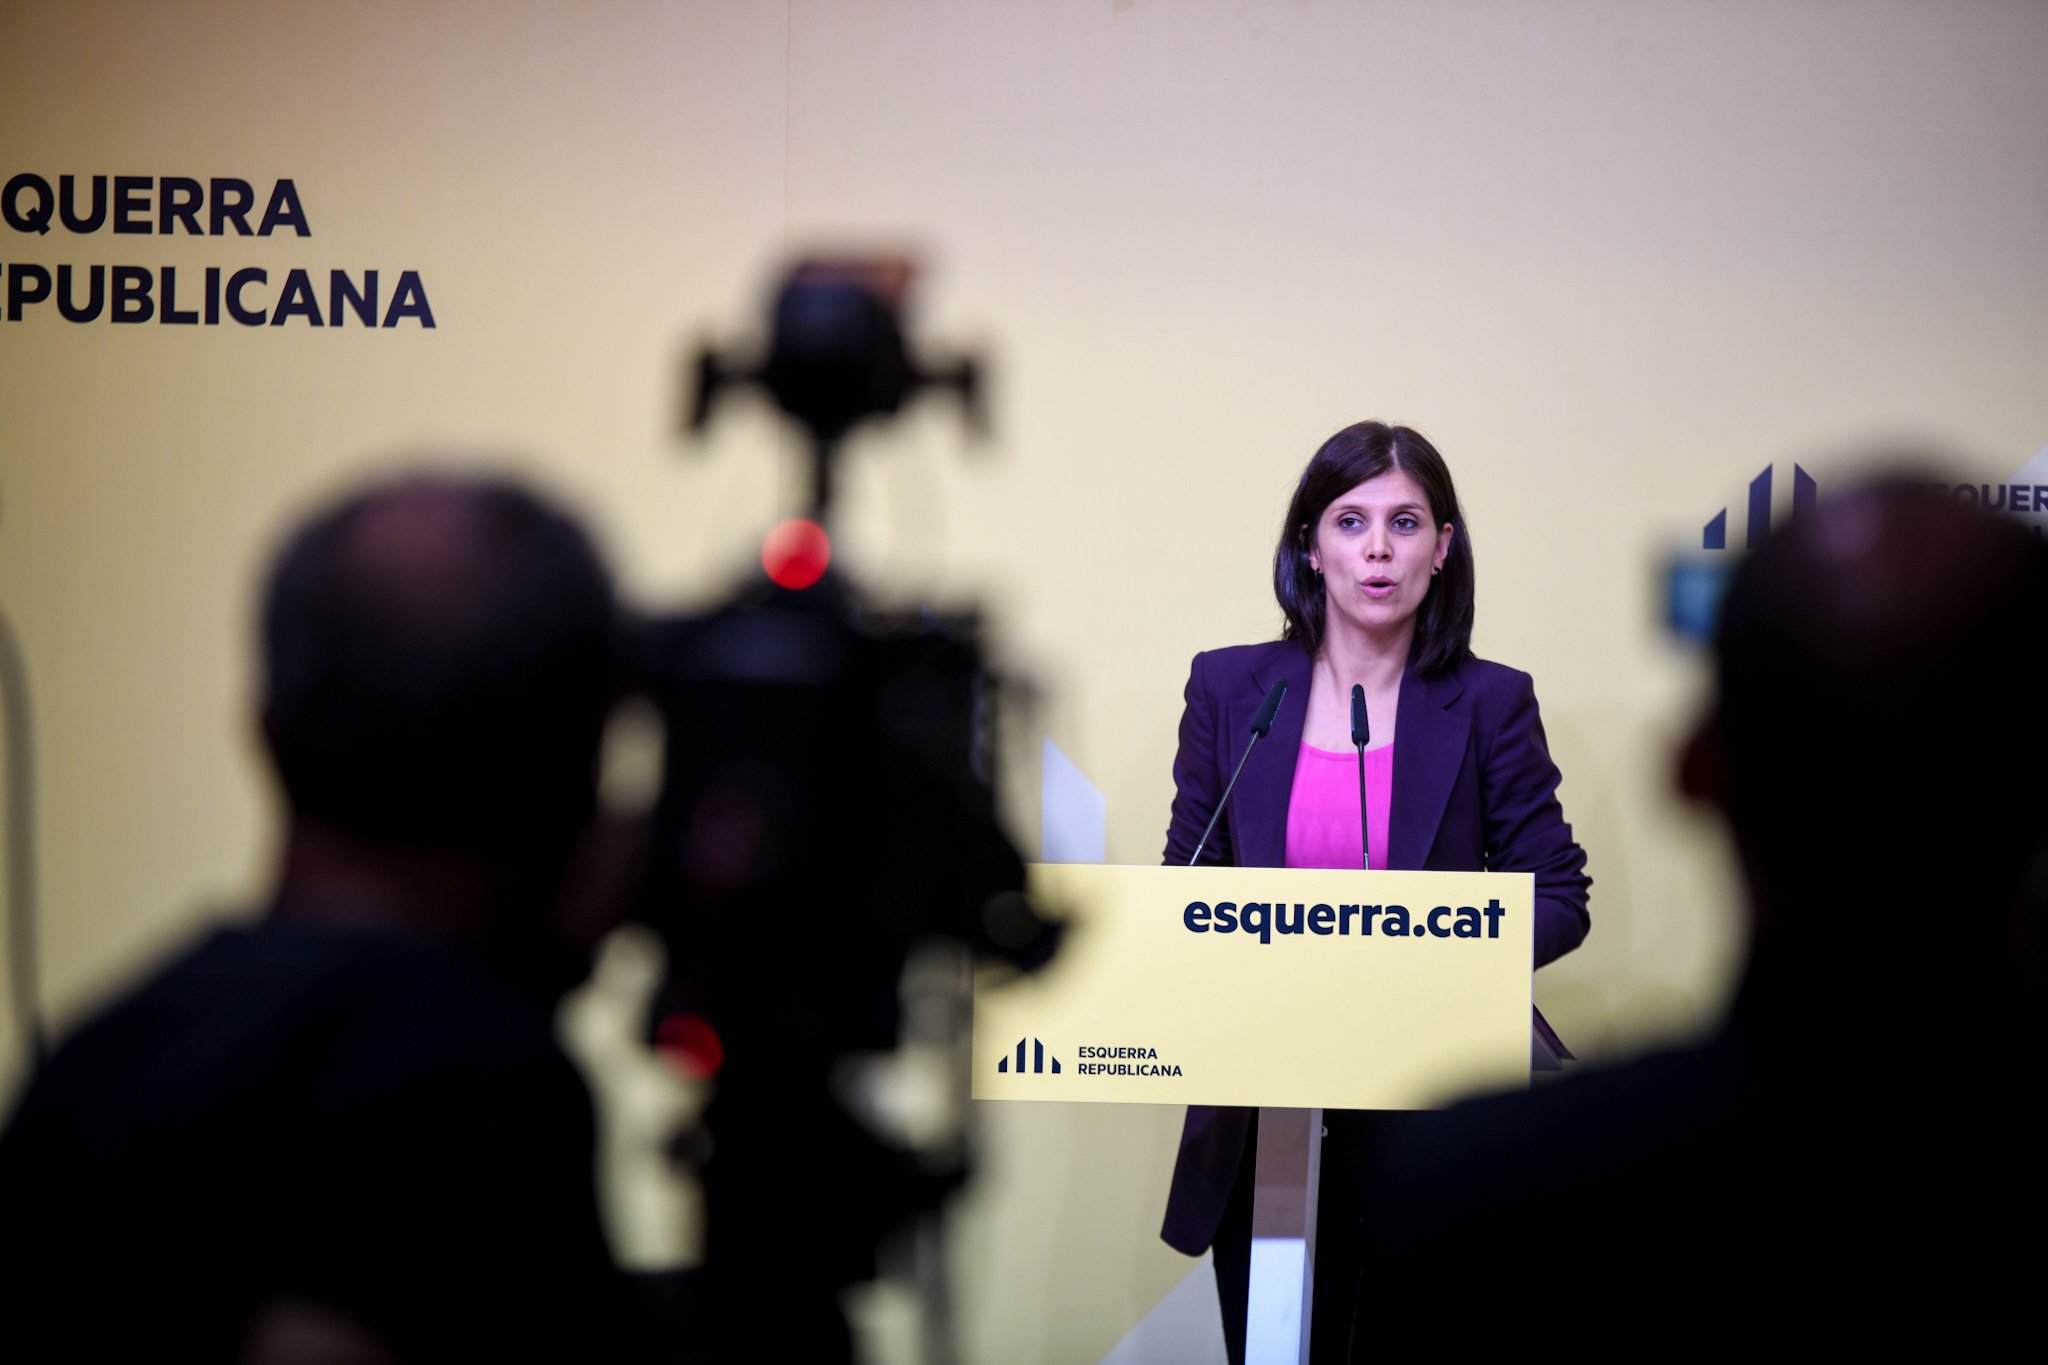 ERC calls for support from Junts: "Head-on opposition would not be understood"